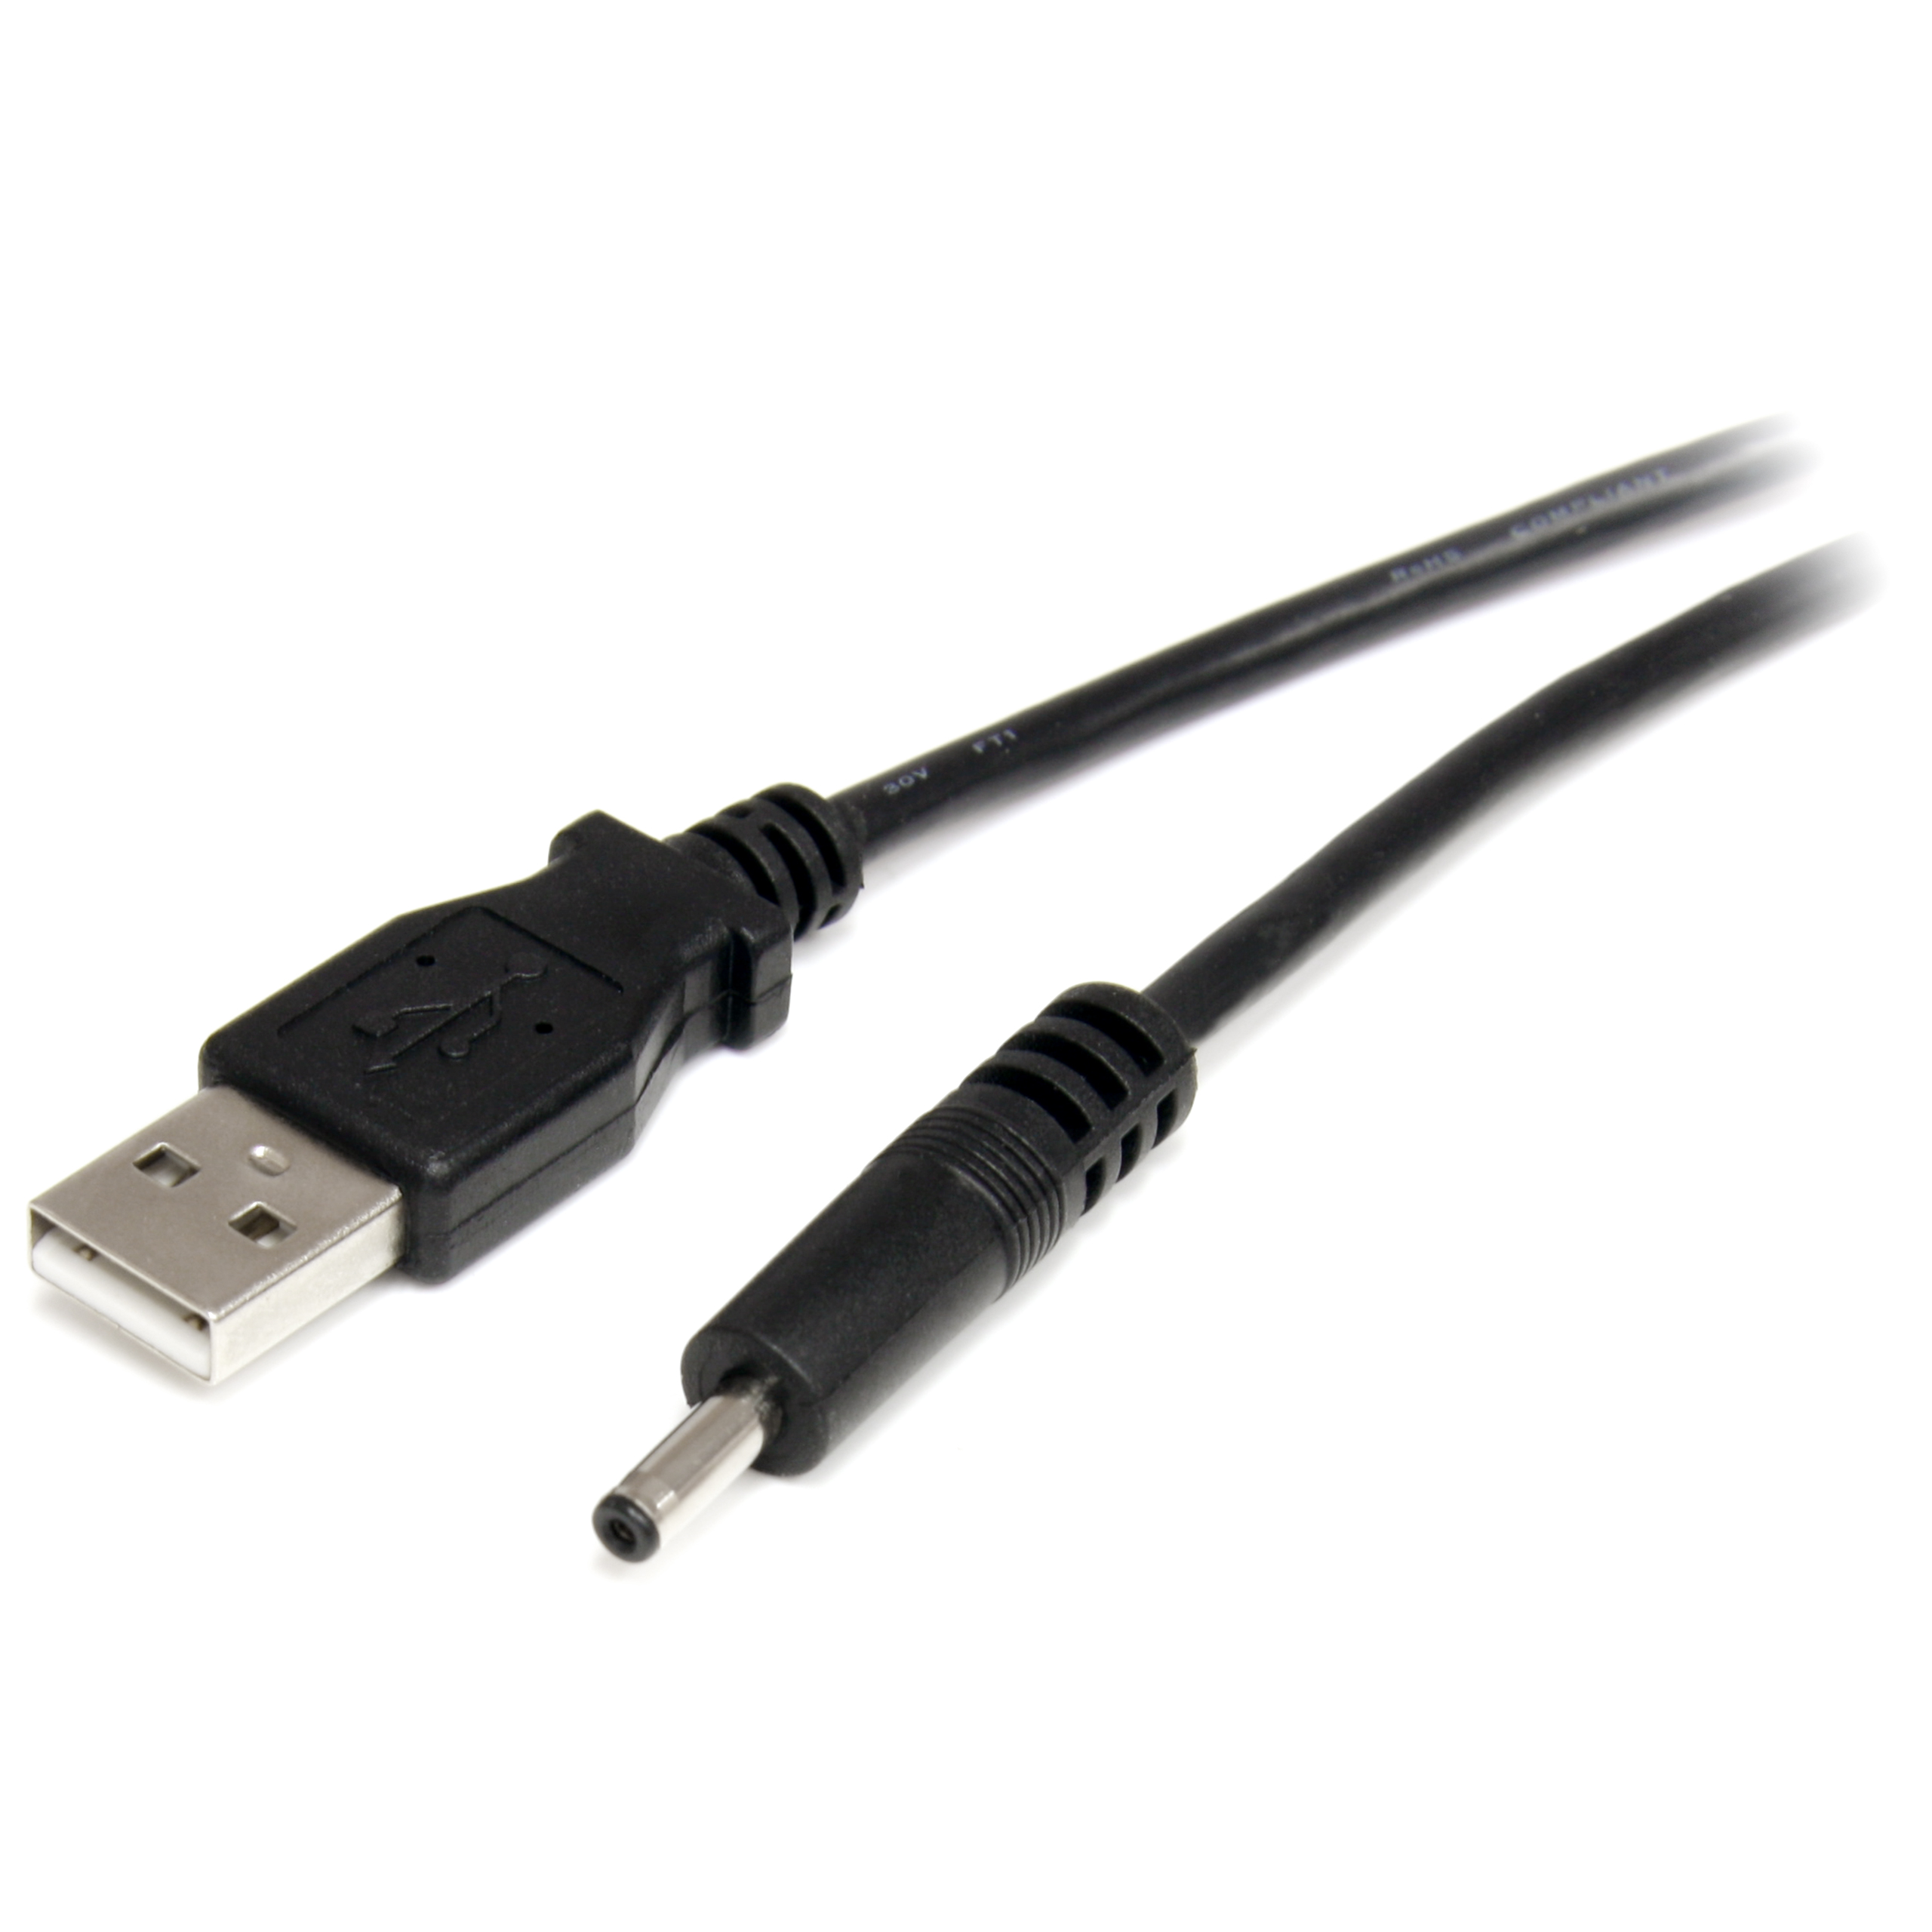 Product  StarTech.com 3 ft. (0.9 m) USB to Type H Barrel 5V DC Power Cable  - USB to 3.4mm Power Cable - 5V DC Type H - Black - Bluetooth Charger (